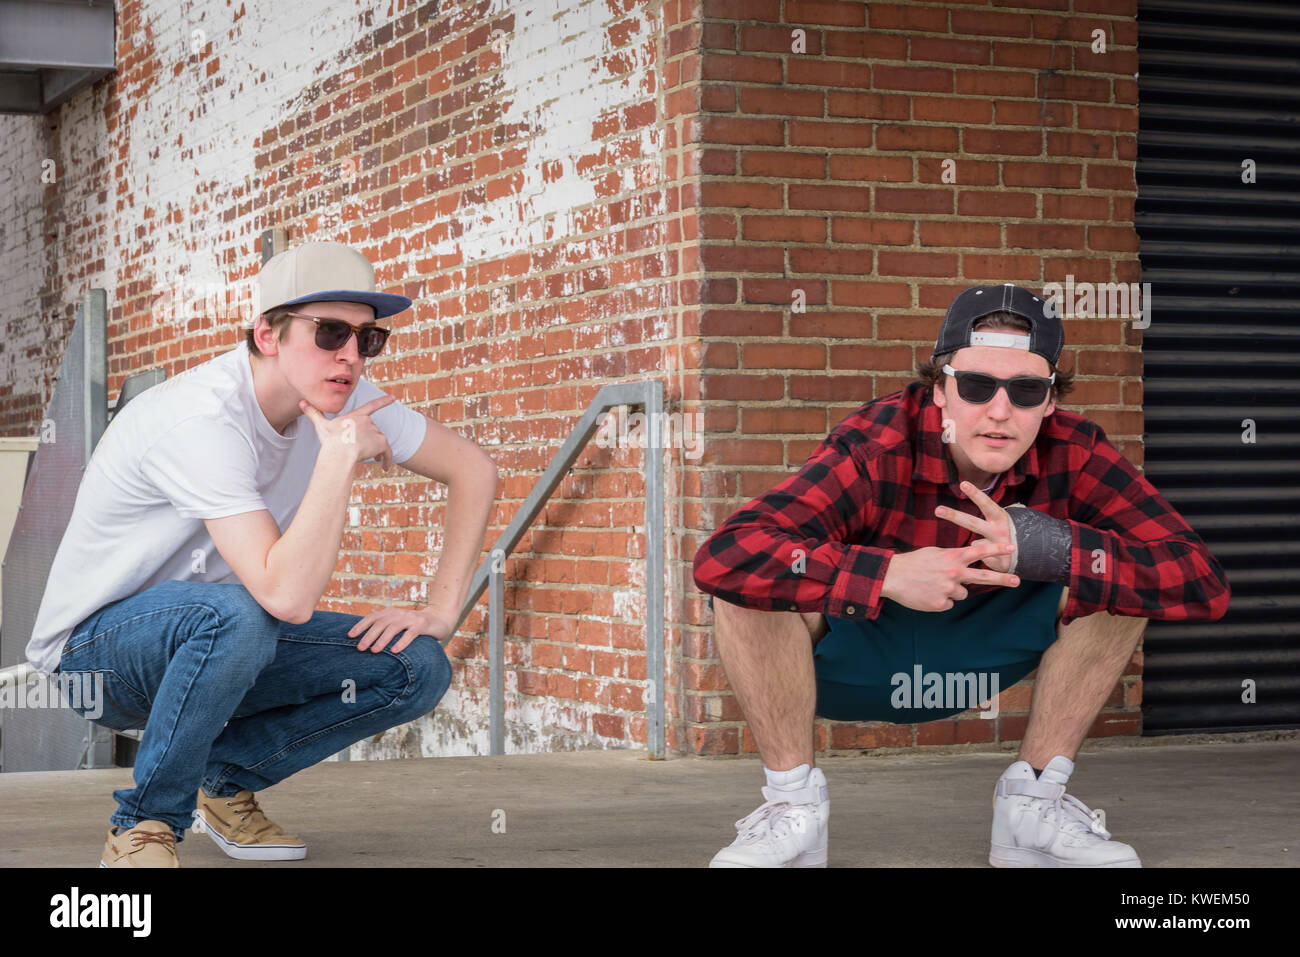 young men in sunglasses and snap back caps posing on loading dock with brick wall Stock Photo